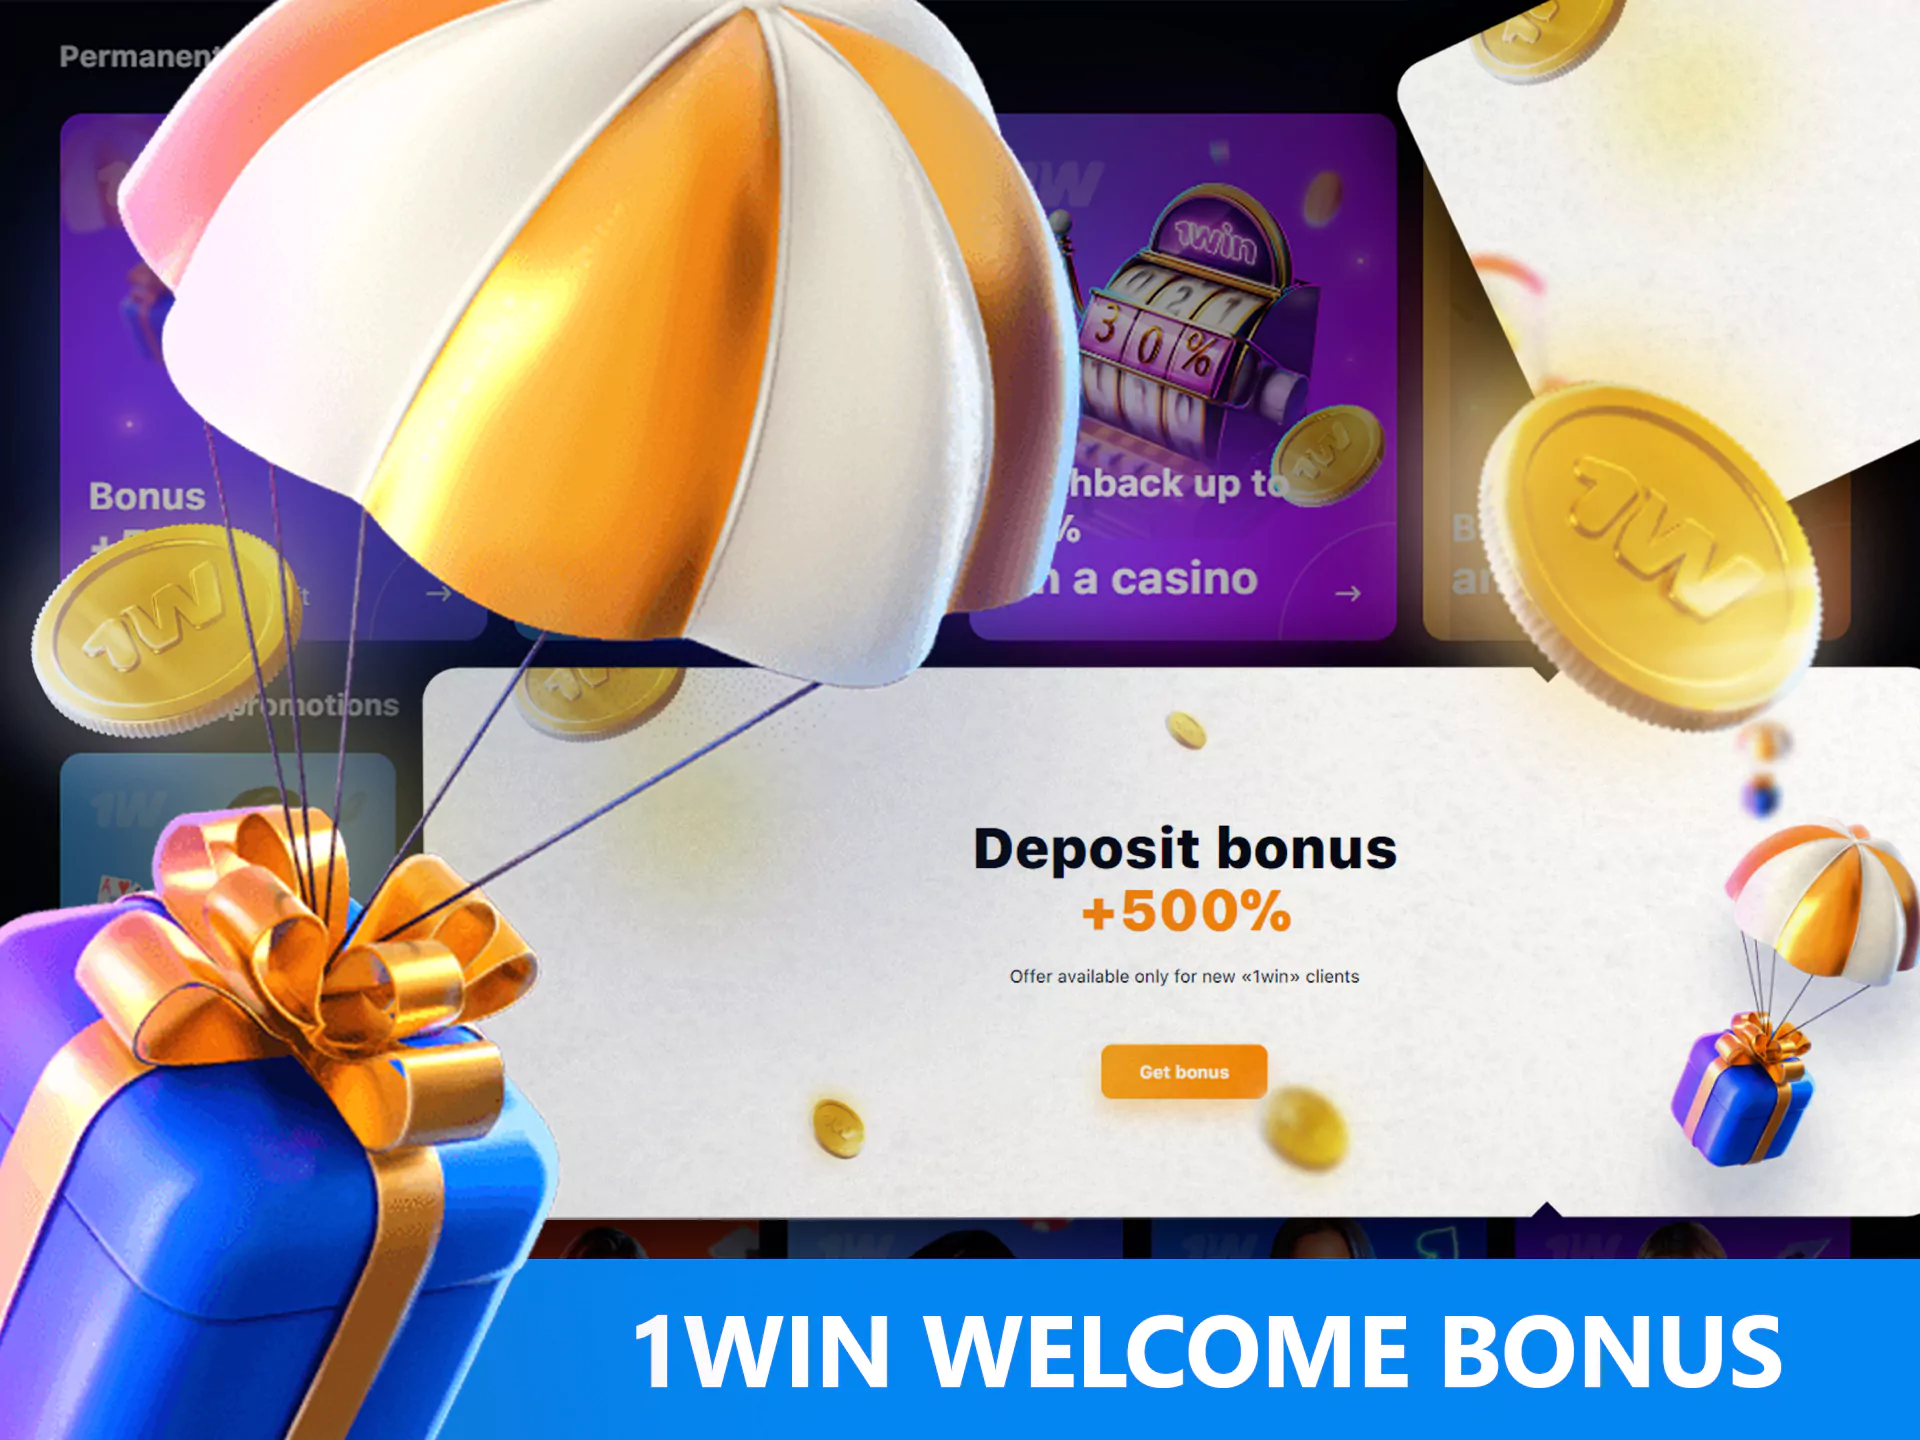 The welcome offer of 1win is a bonus on the first deposit.